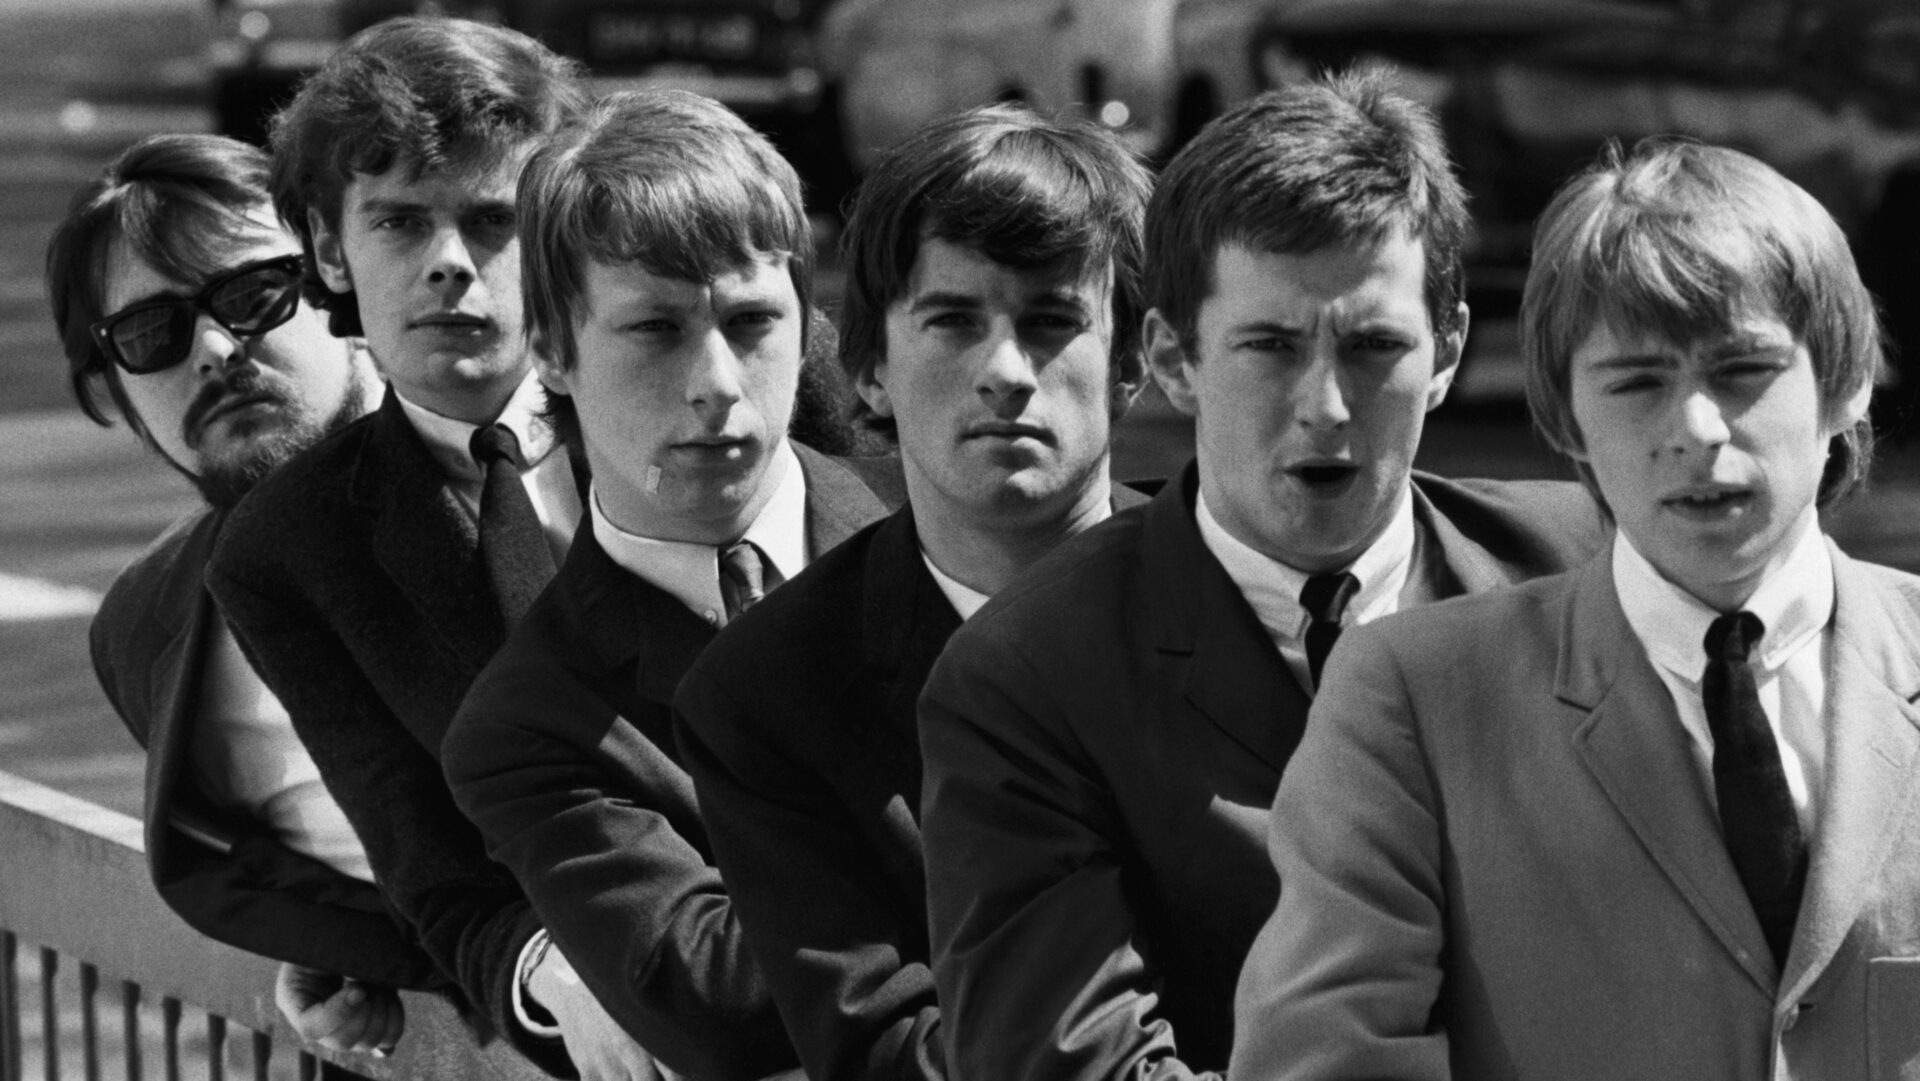 The British pop group of Yardbirds: (left to right) Giorgio Gomelsky, Paul Samwell-Smith, Chris Dreja, Jim McCarty, Eric Clapton, and Keith Reif. (Photo by © Hulton-Deutsch Collection/CORBIS/Corbis via Getty Images)